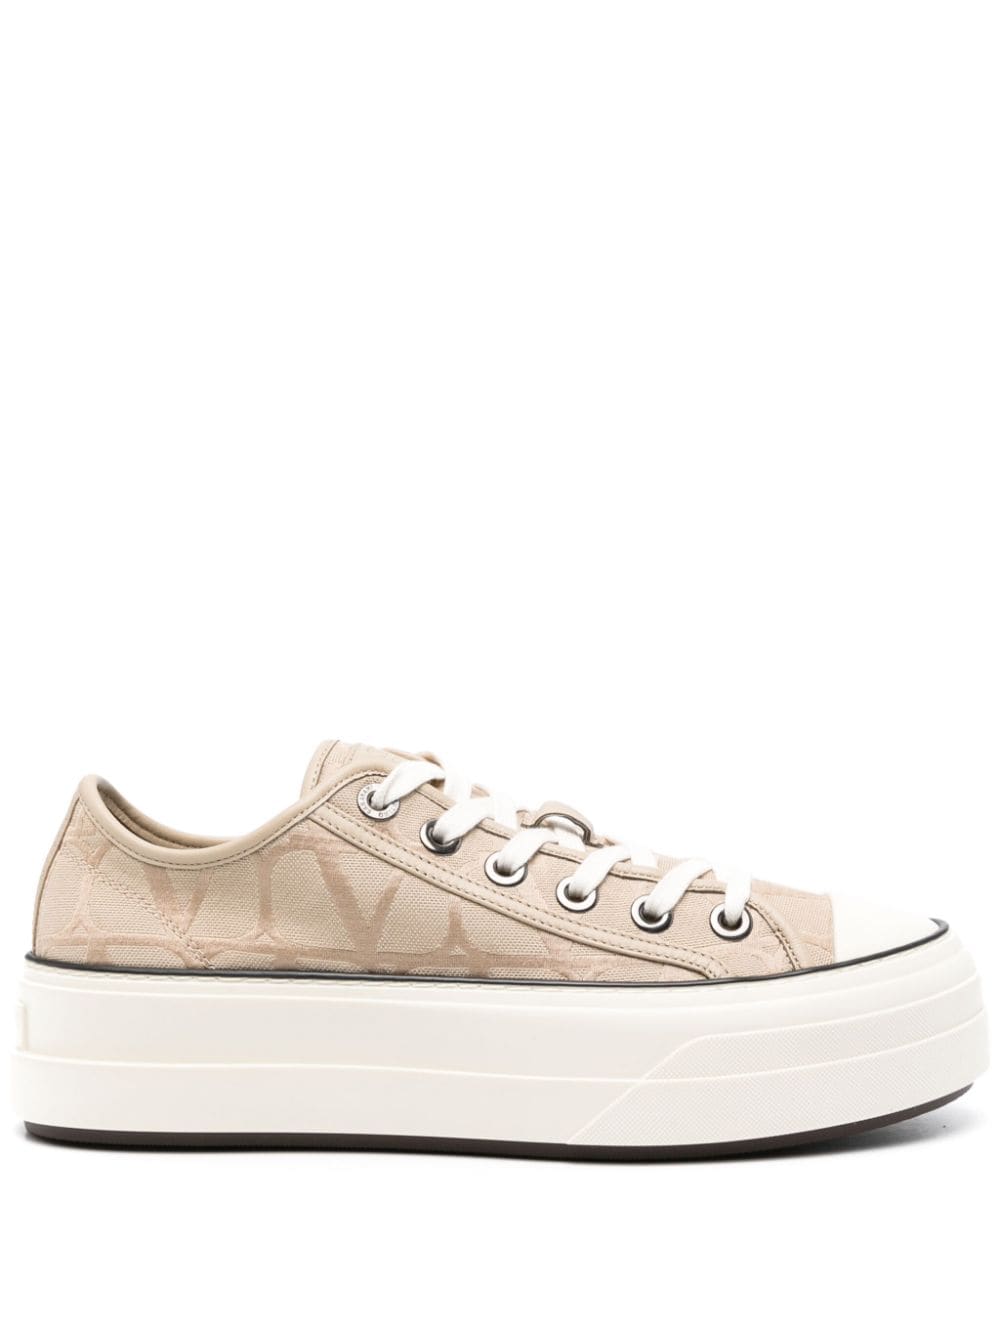 VALENTINO Chinos Chivonerfo Sneakers with Beige Sole for Women